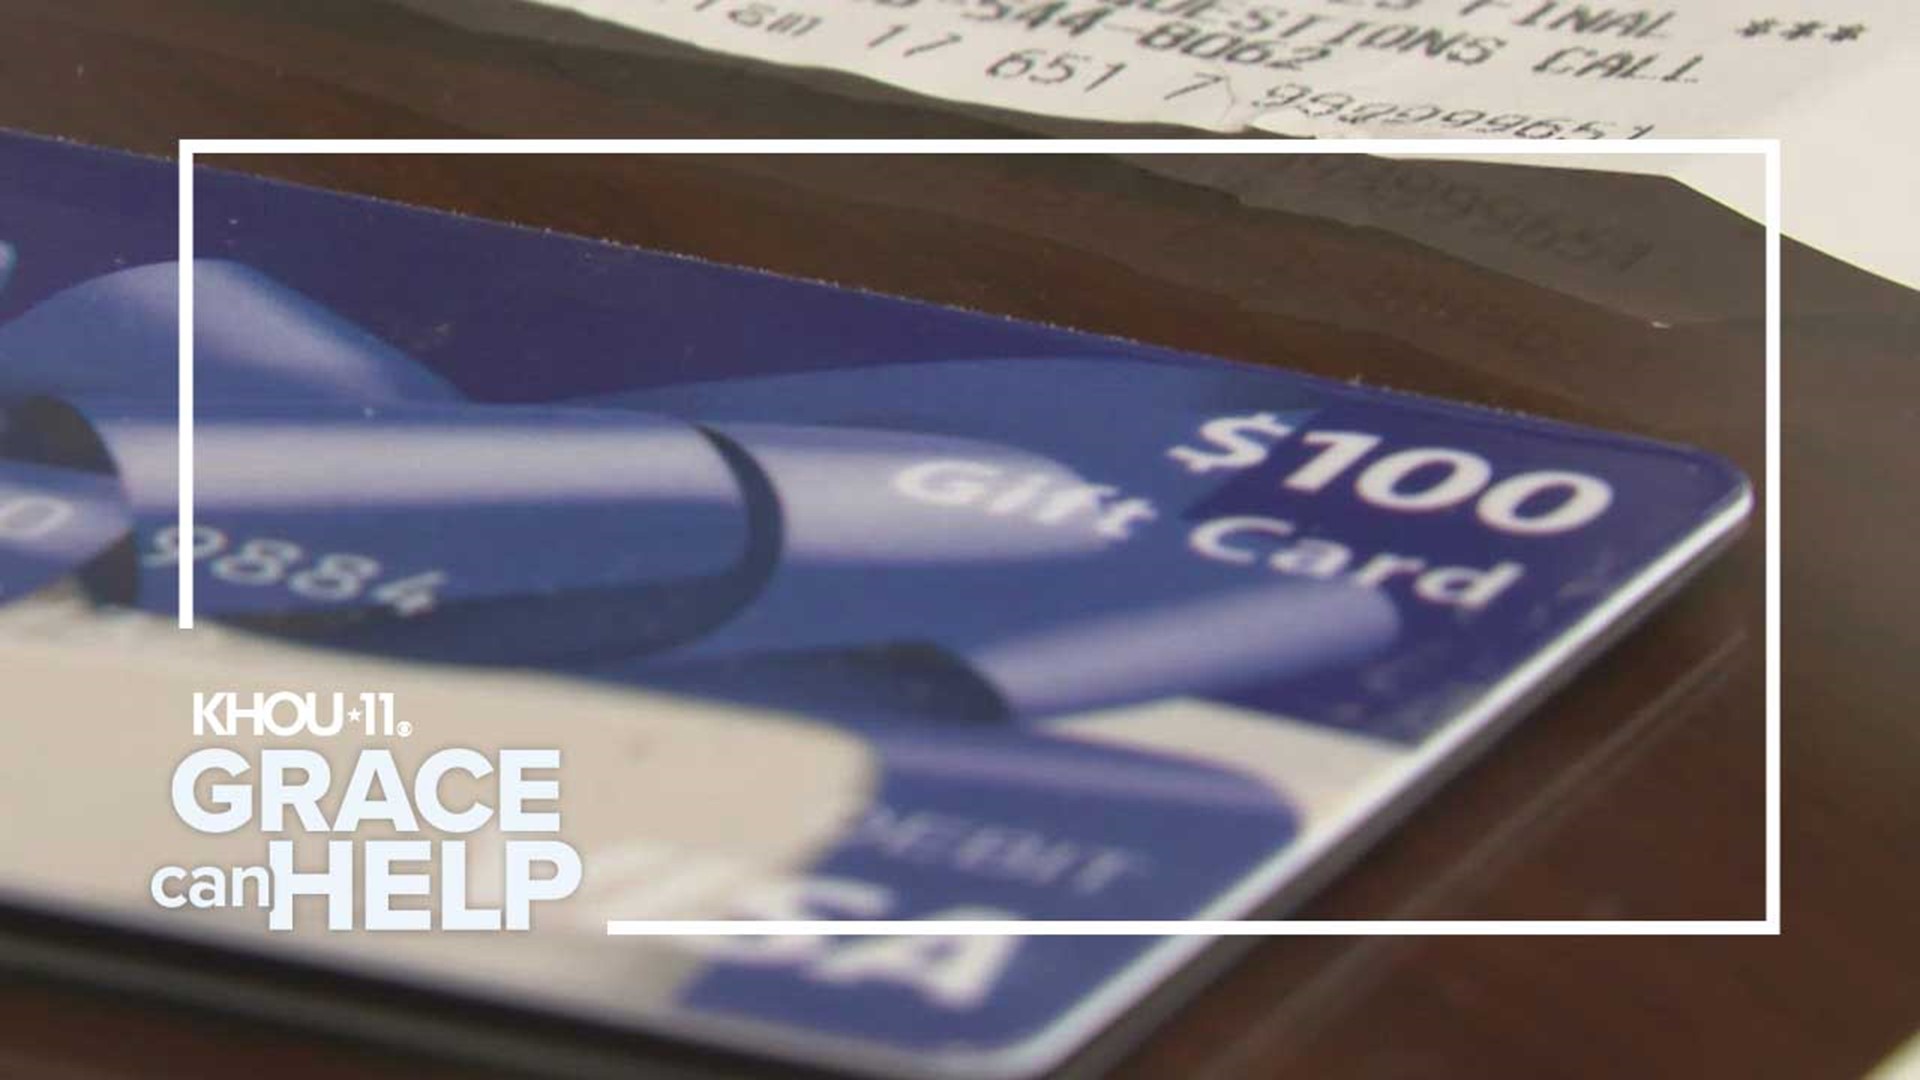 The Houston Police Union purchased four $100 gift cards from Kroger, but the balances were drained before they could be used.